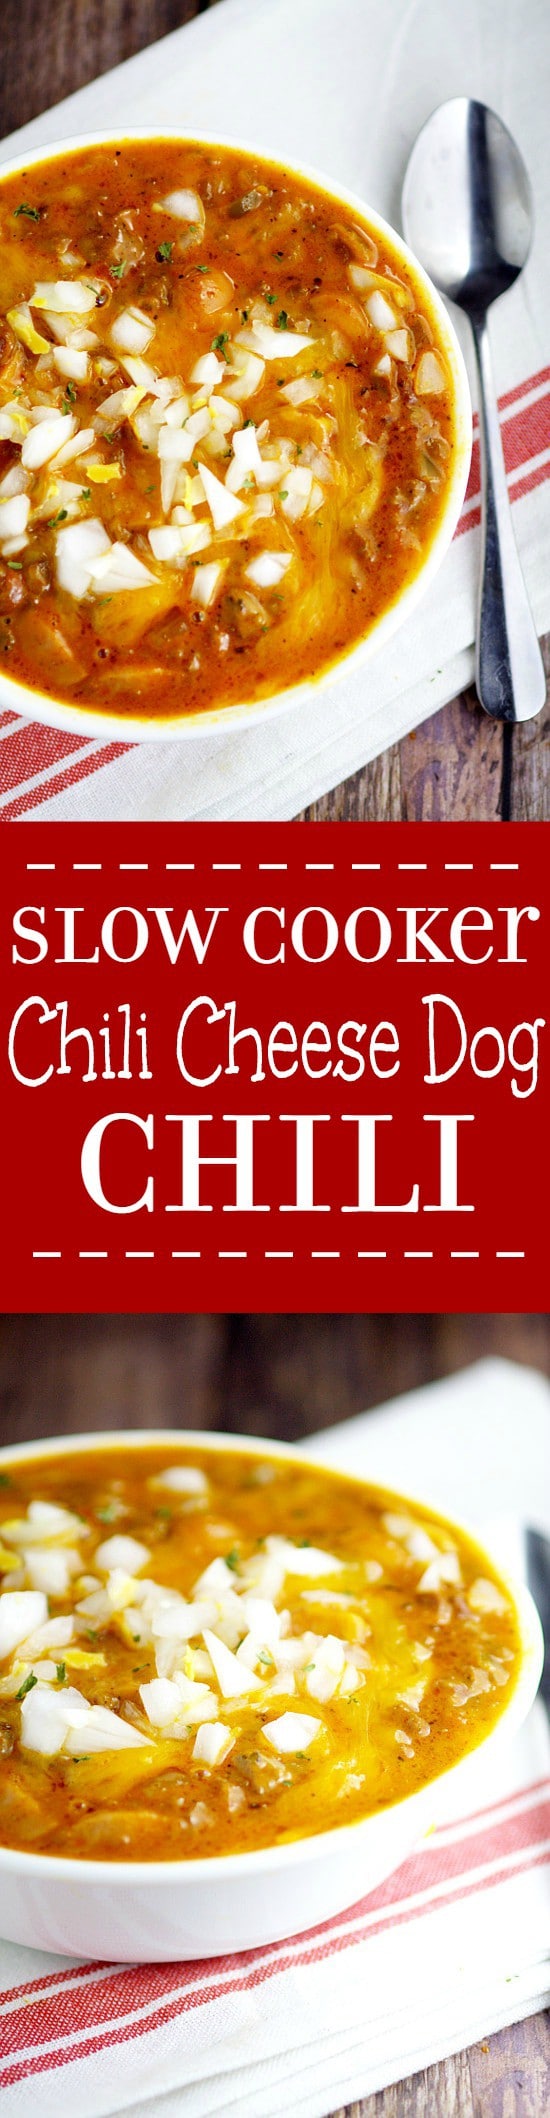 Slow Cooker Chili Cheese Dog Chili Recipe. Traditional beef chili recipe with the classic, gooey cheesy flavors of chili cheese dogs meld together with perfection right in the Crockpot in this Slow Cooker Chili Cheese Dog Chili recipe. This would be so fabulous for a chilly day!  And look at all that delicious gooey cheese!